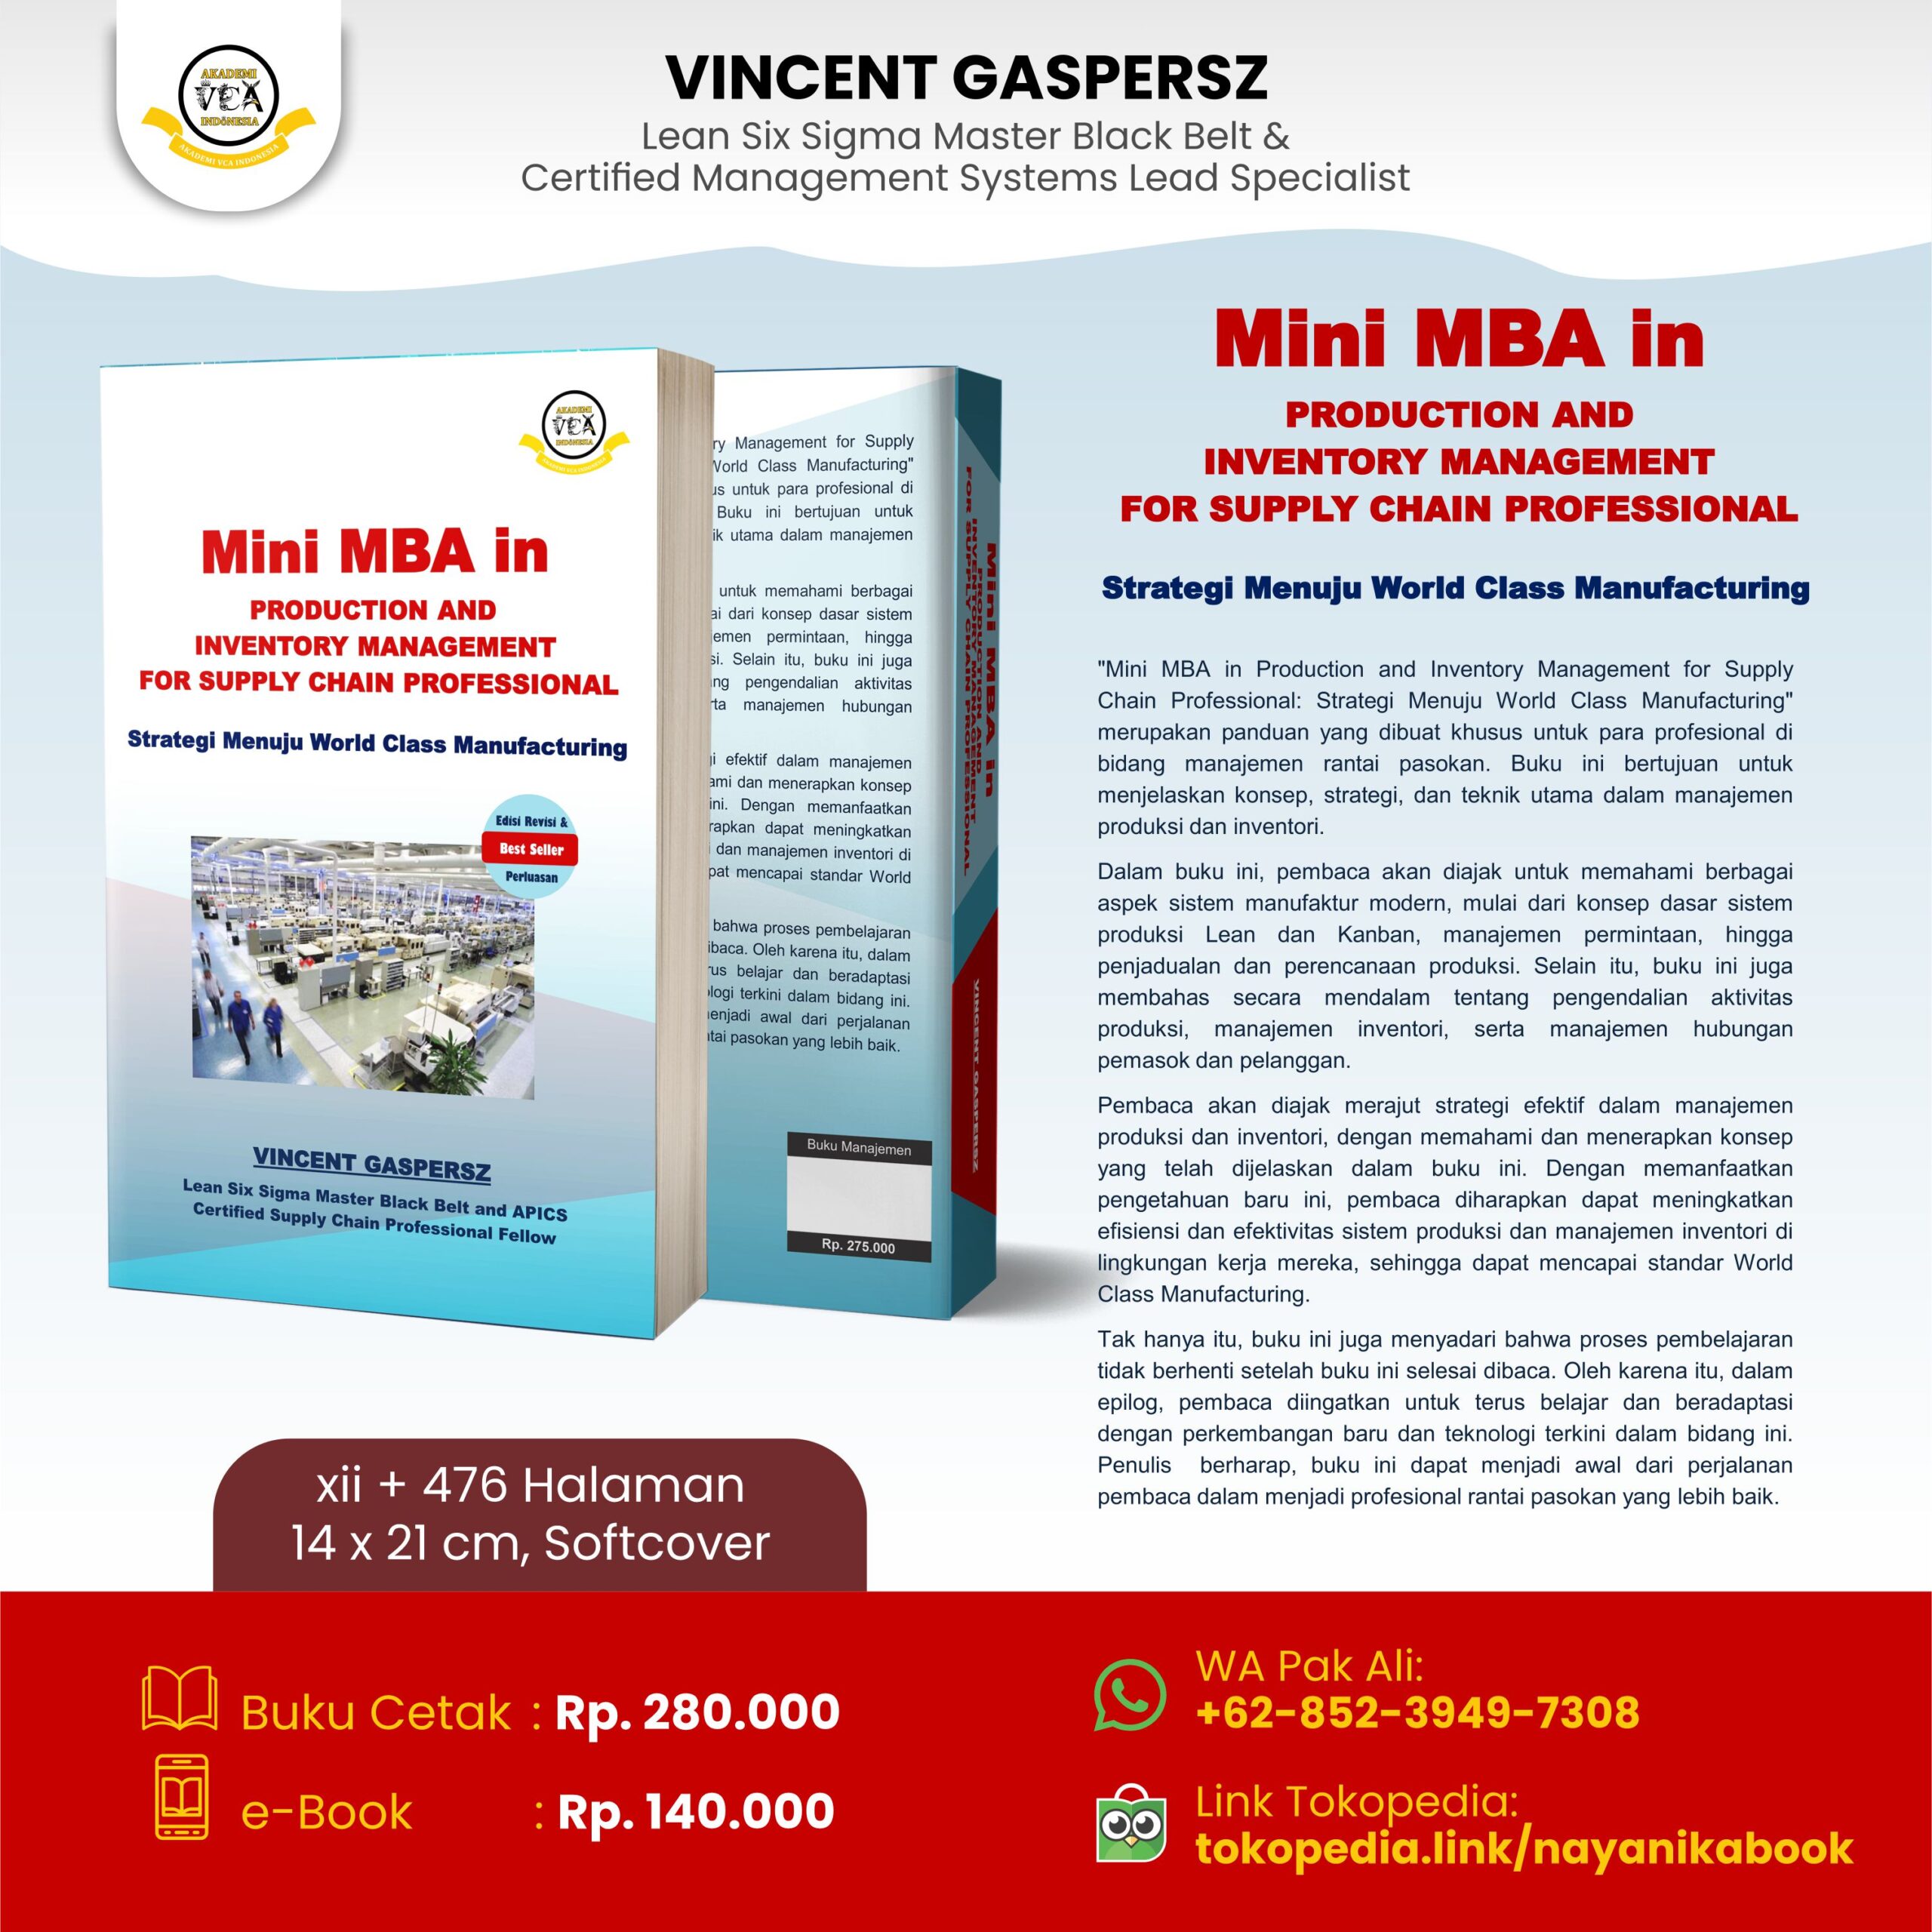 Mini MBA in Production and Inventory Management for Supply Chain Professional